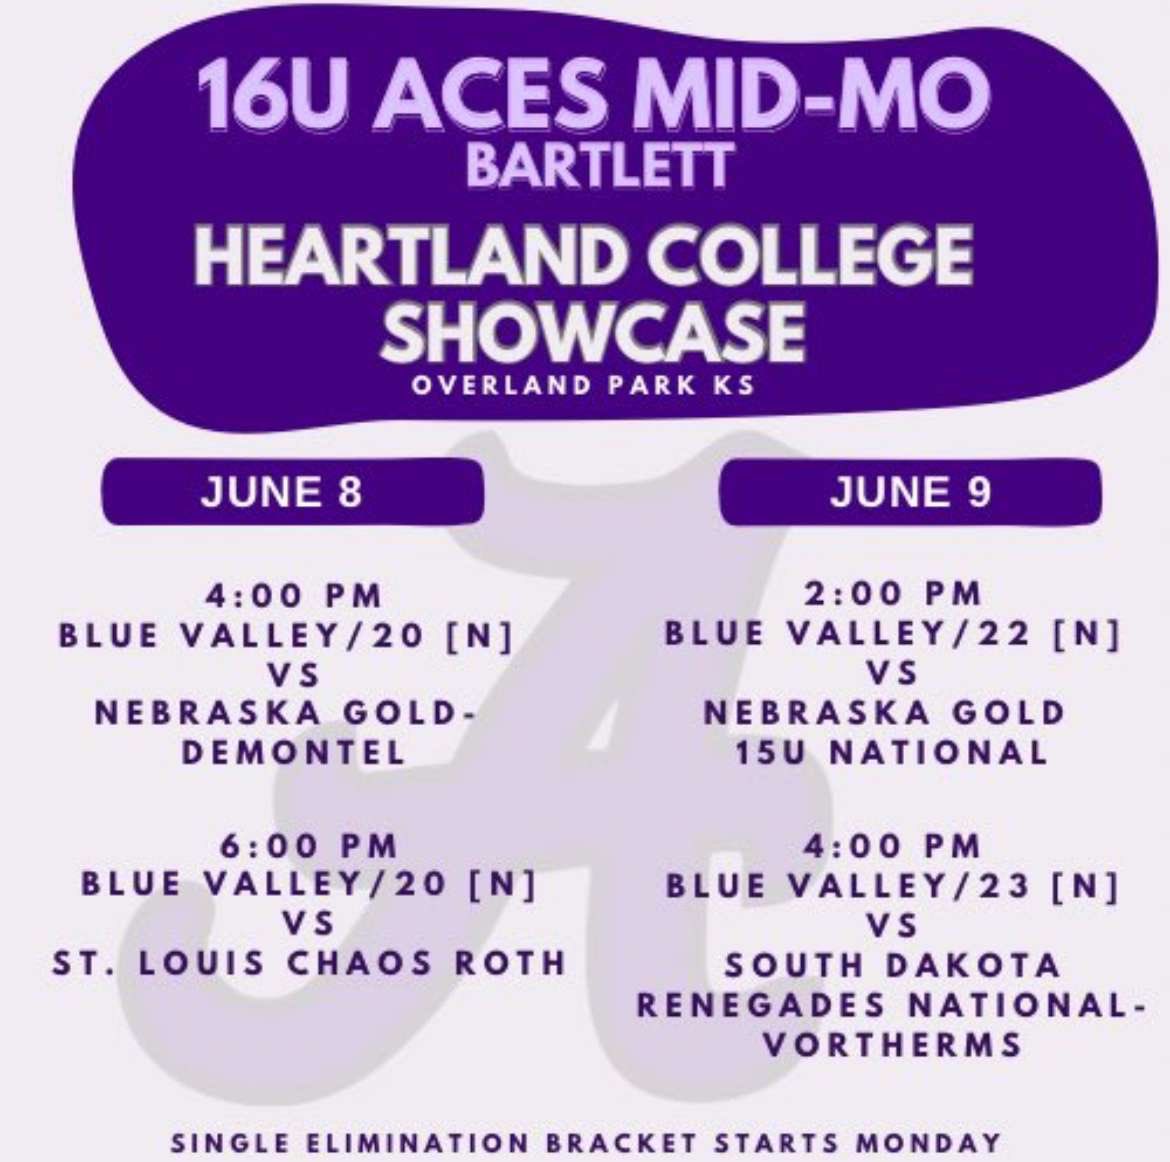 I can’t wait to play with my Aces girls again this weekend in the Heartland College Showcase! Go Aces!! 💜 @AcesFPMidMO @tbartlett76